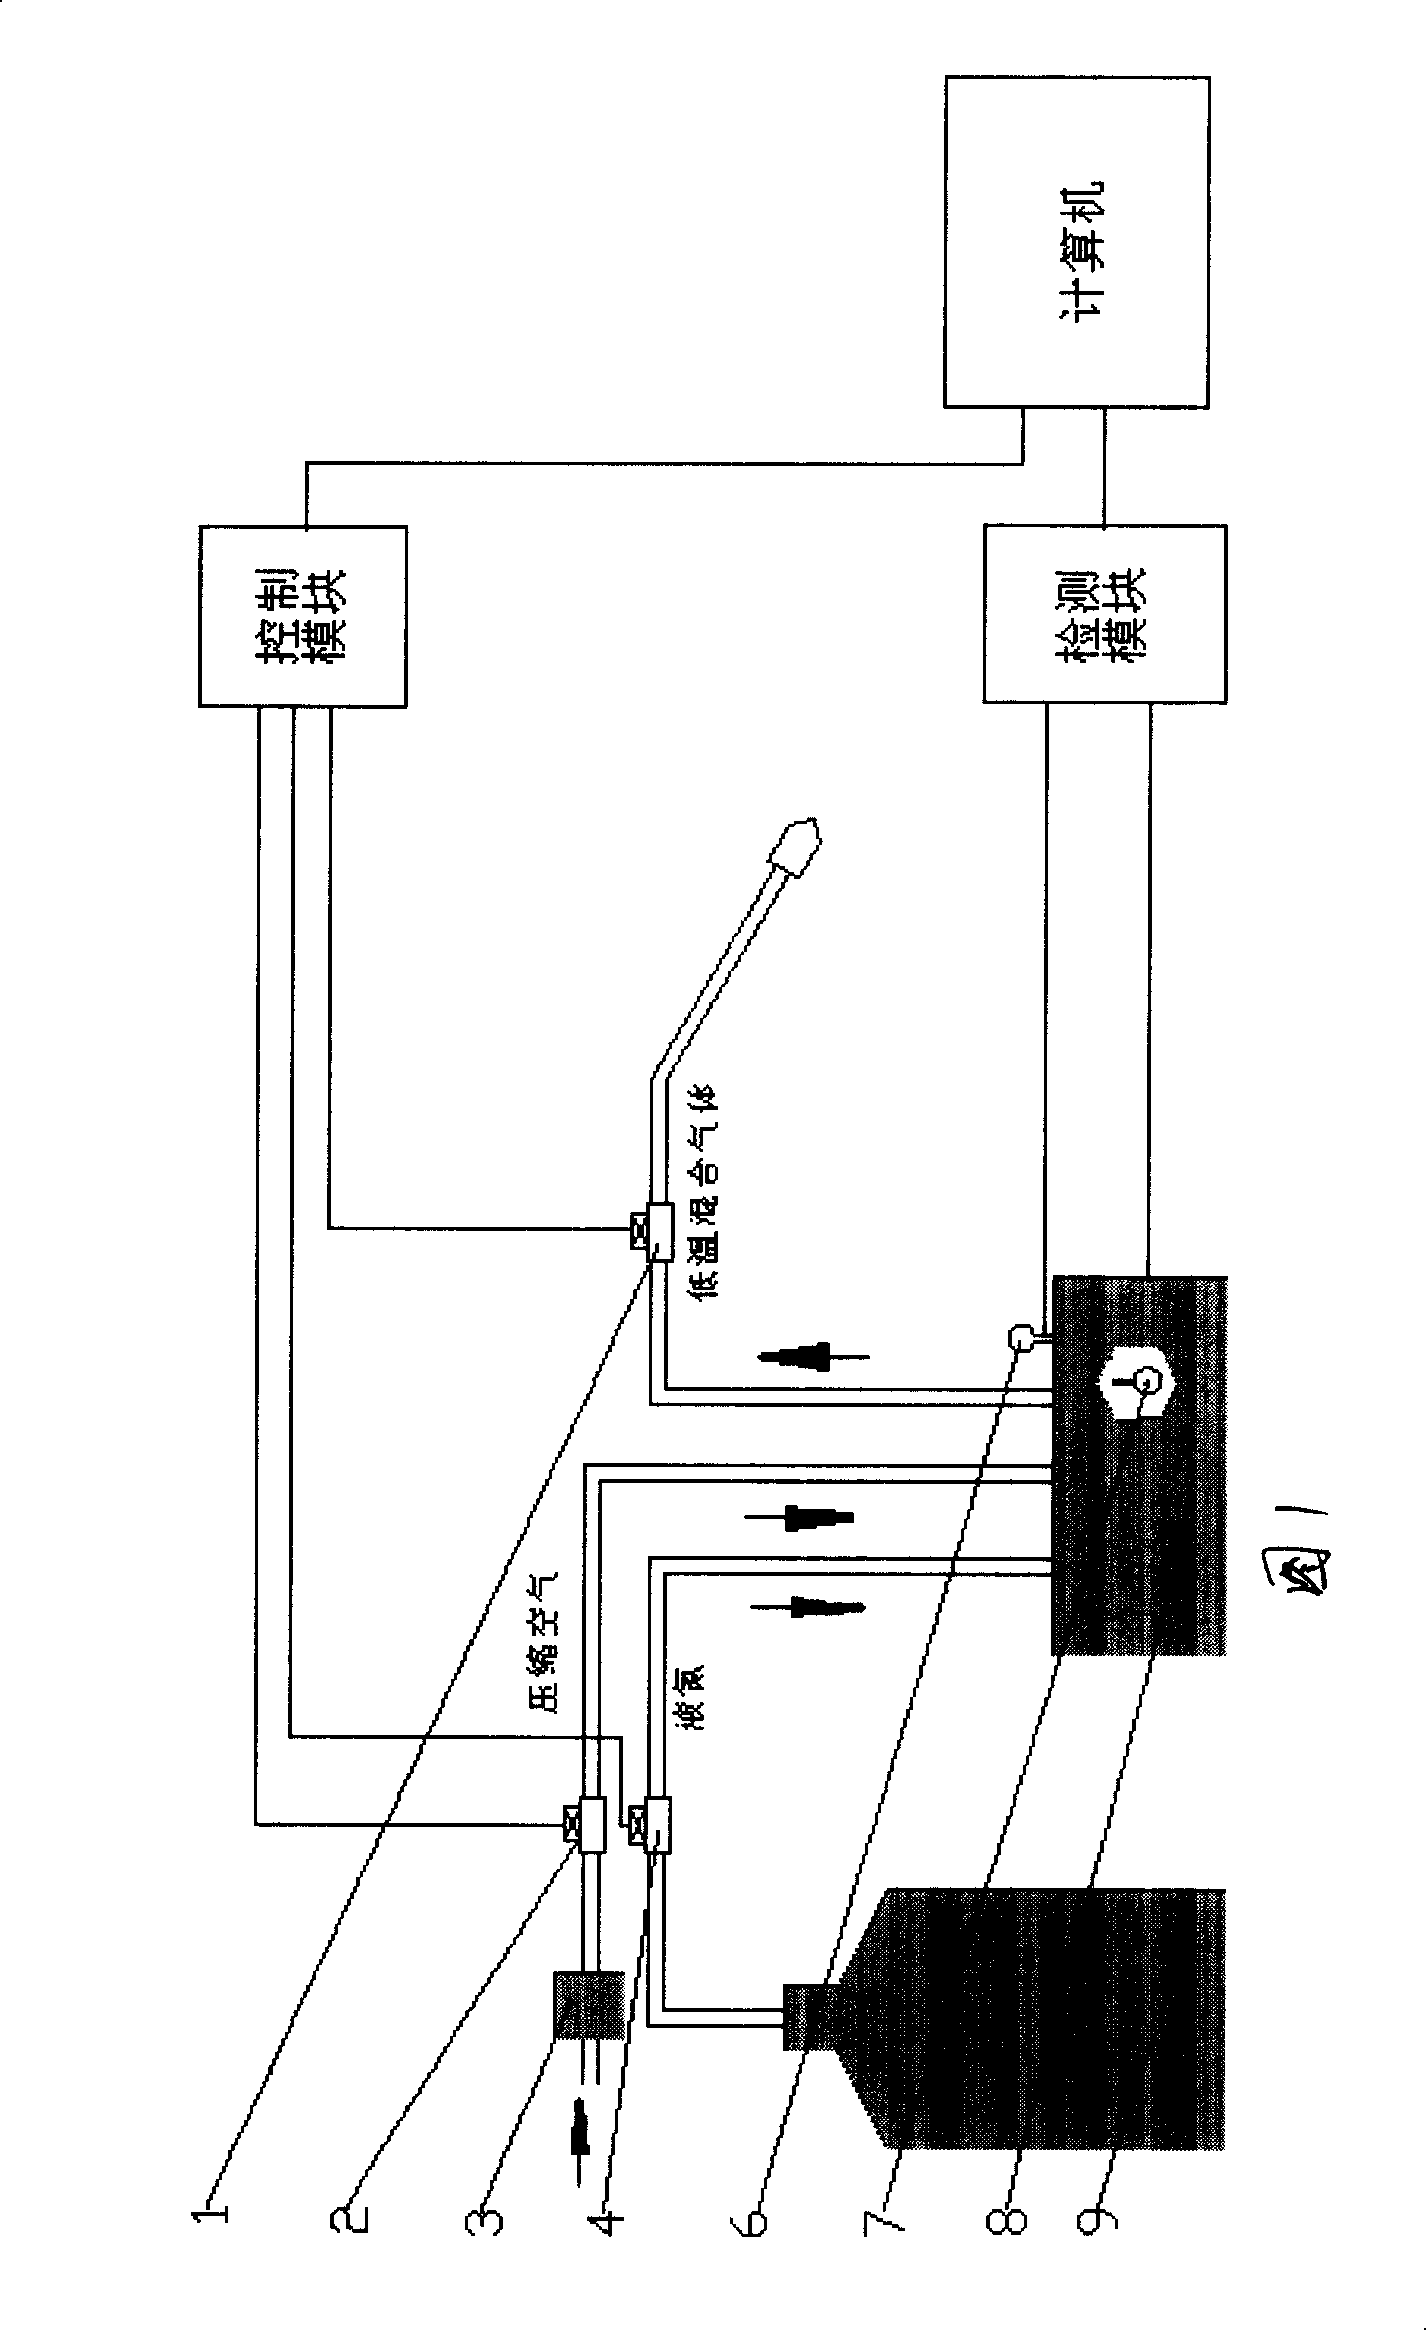 Cooling device for cutting process